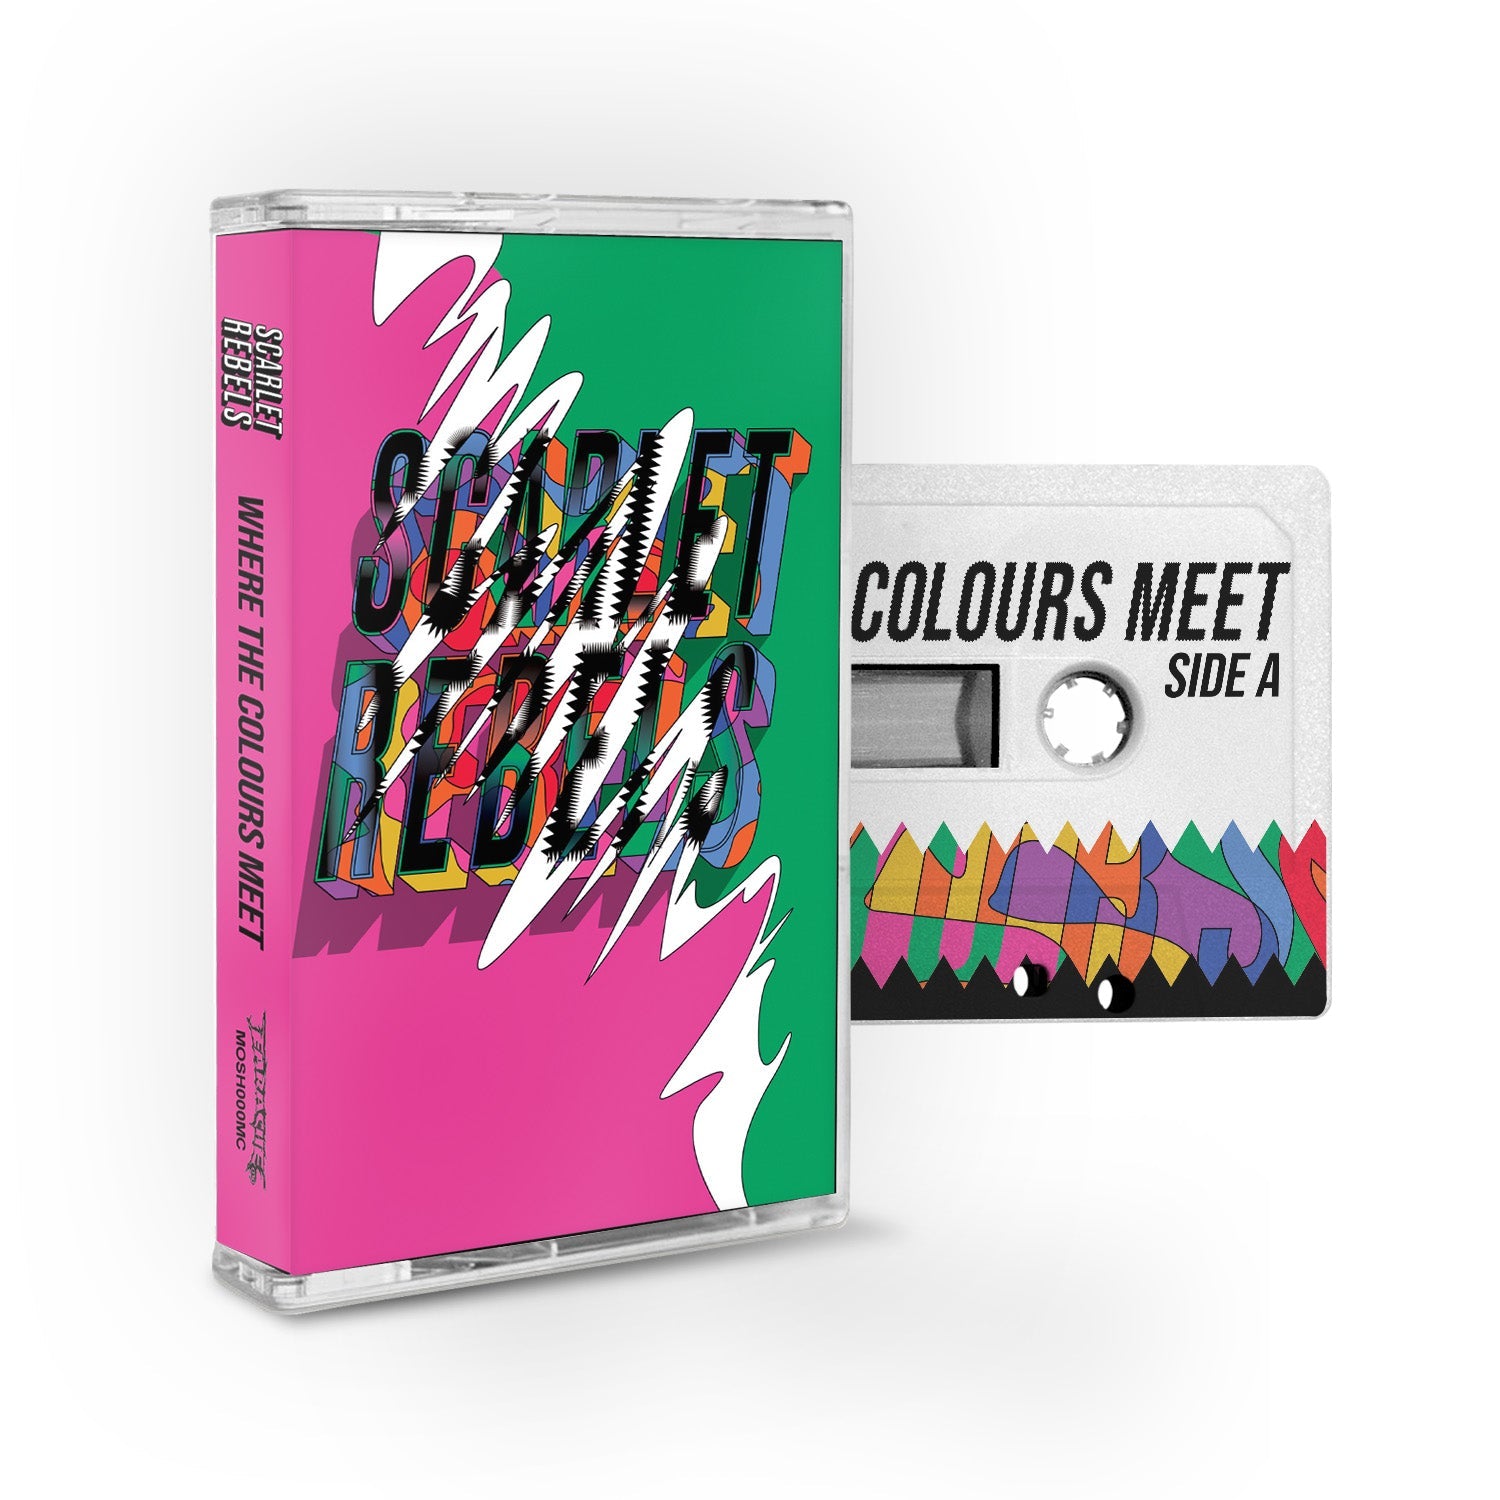 Scarlet Rebels "Where The Colours Meet" Cassette Tape & Download - PRE-ORDER